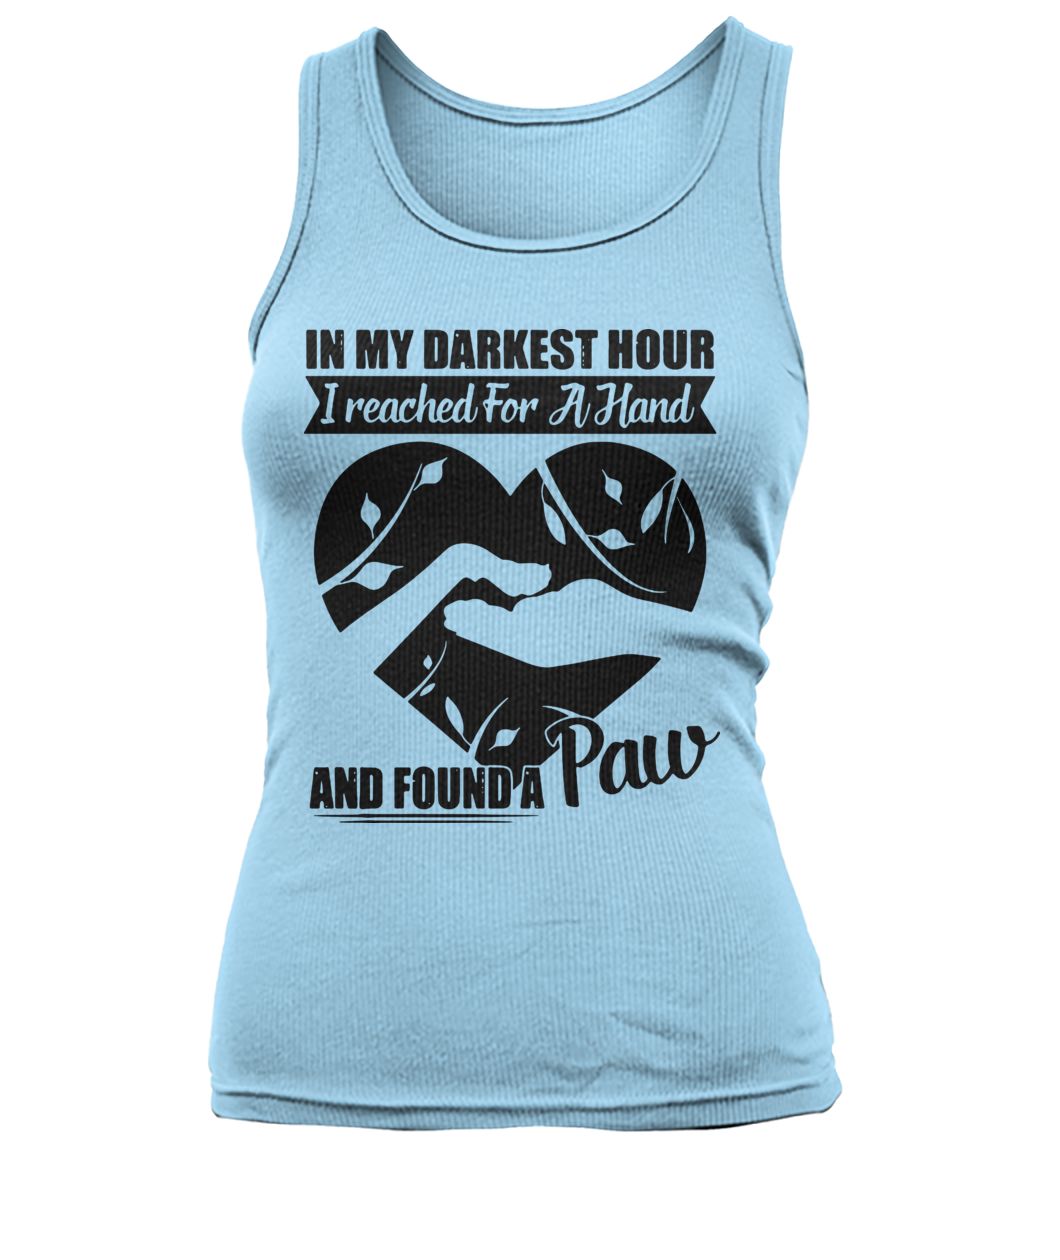 In my darkest hour I reached for a hand and found a paw women's tank top